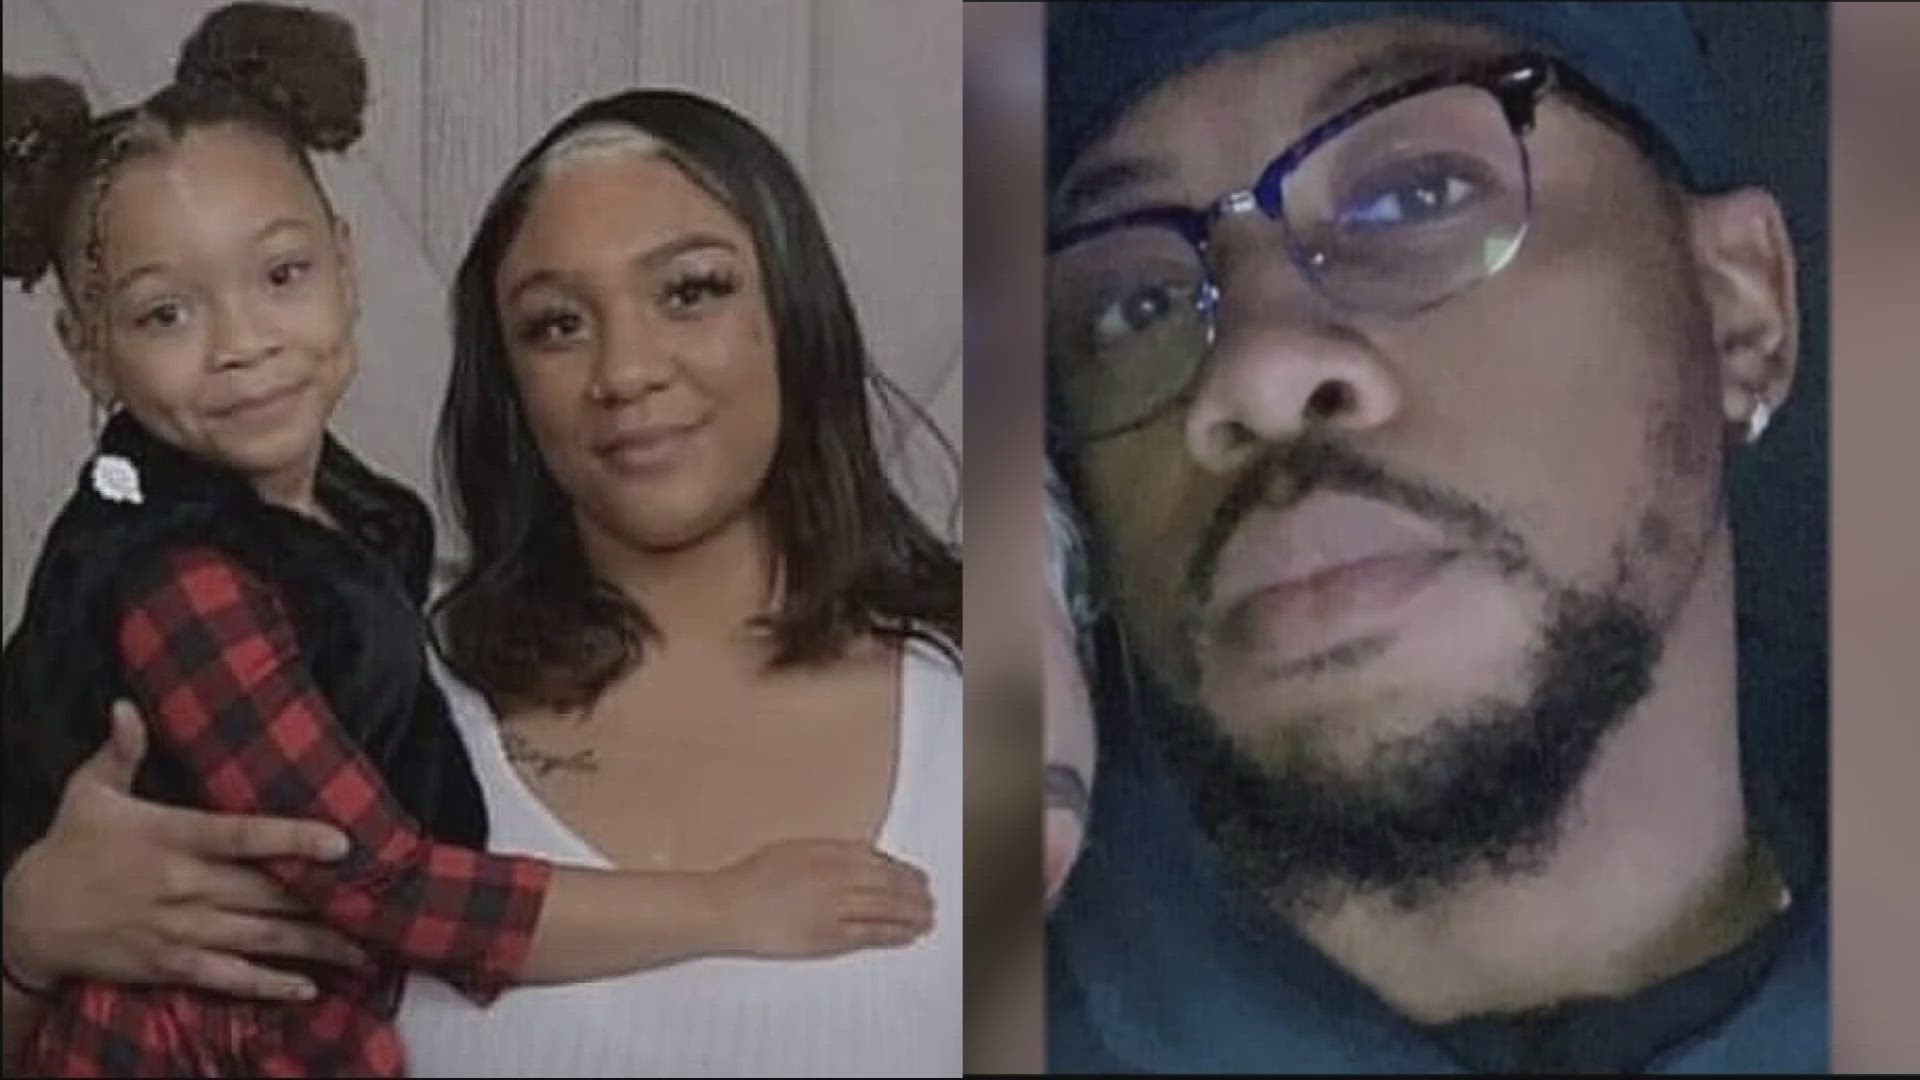 The bodies of Meshay Melendez and Layla Stewart were found March 22. The Clark County Medical Examiner concluded that they both died from bullet wounds to the head.